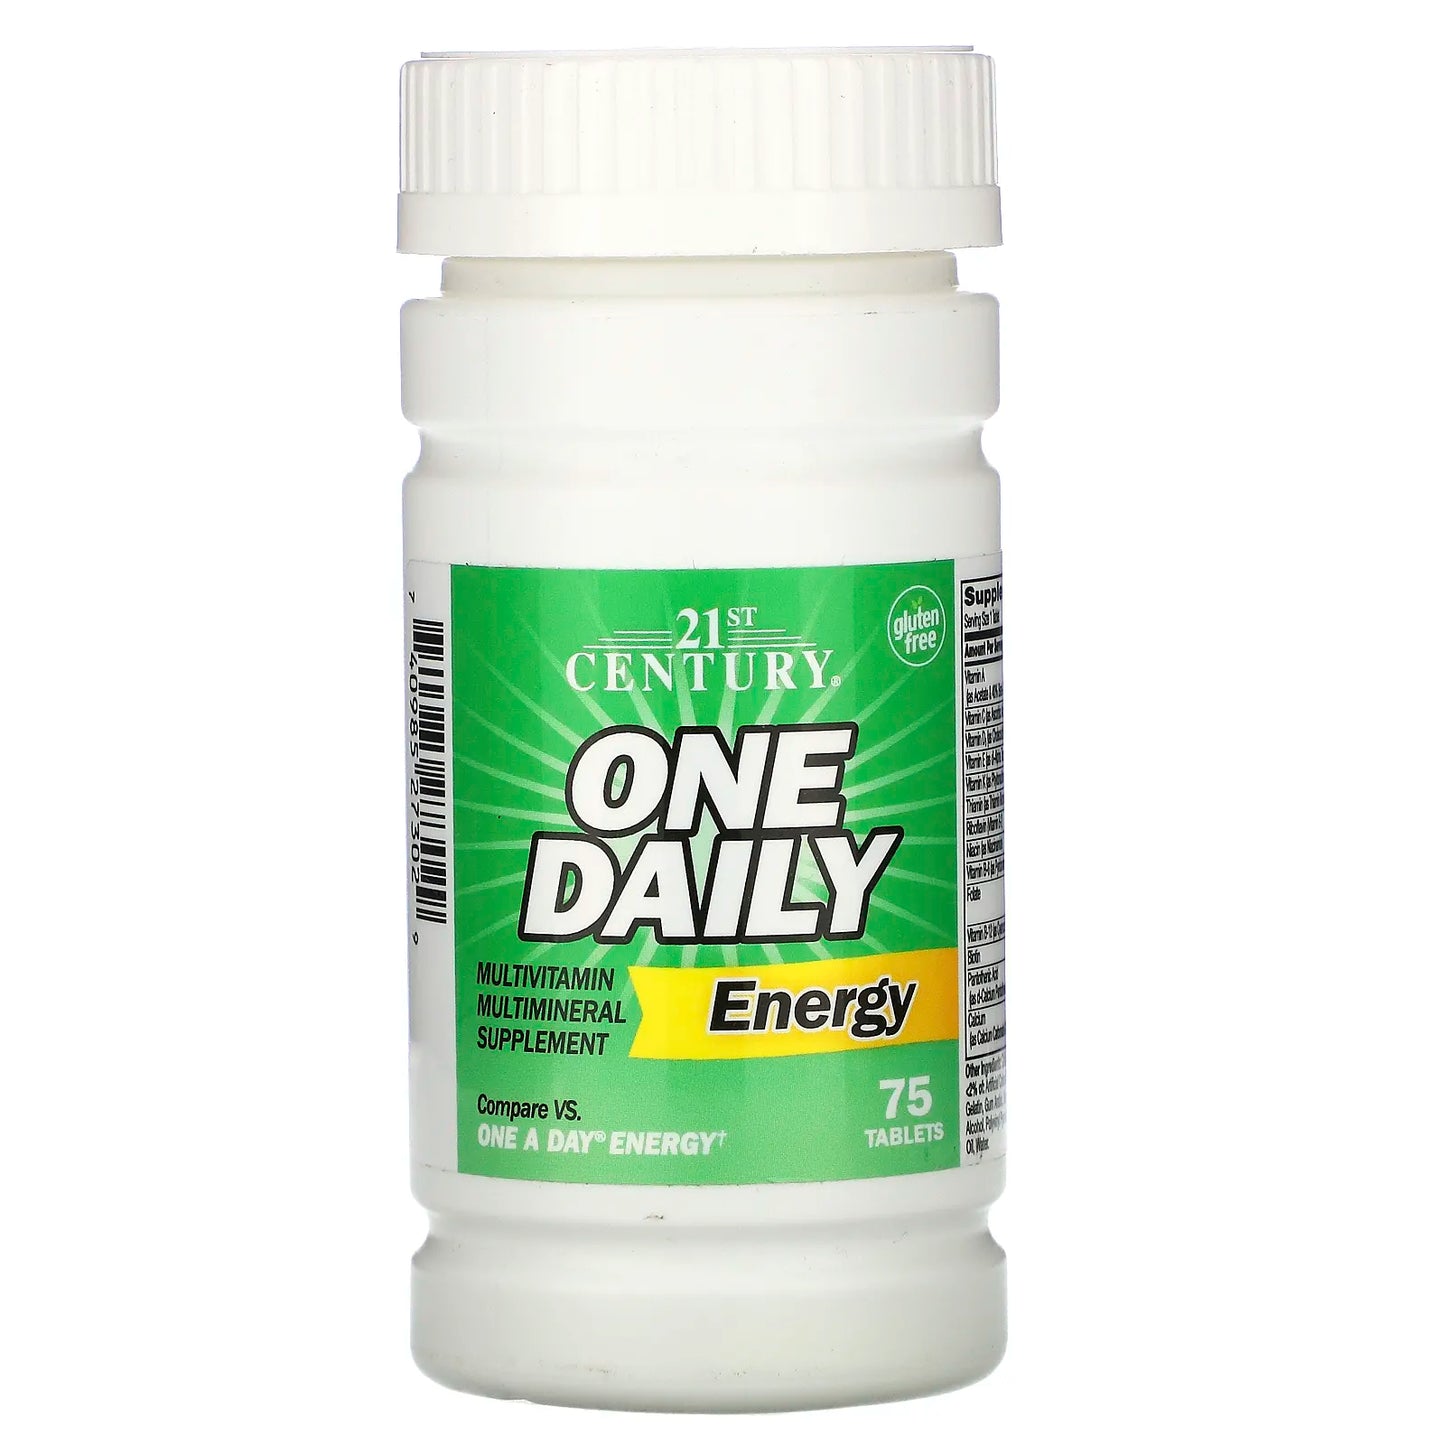 21ST CENTURY ONE DAILY ENERGY, 75 TABLETS